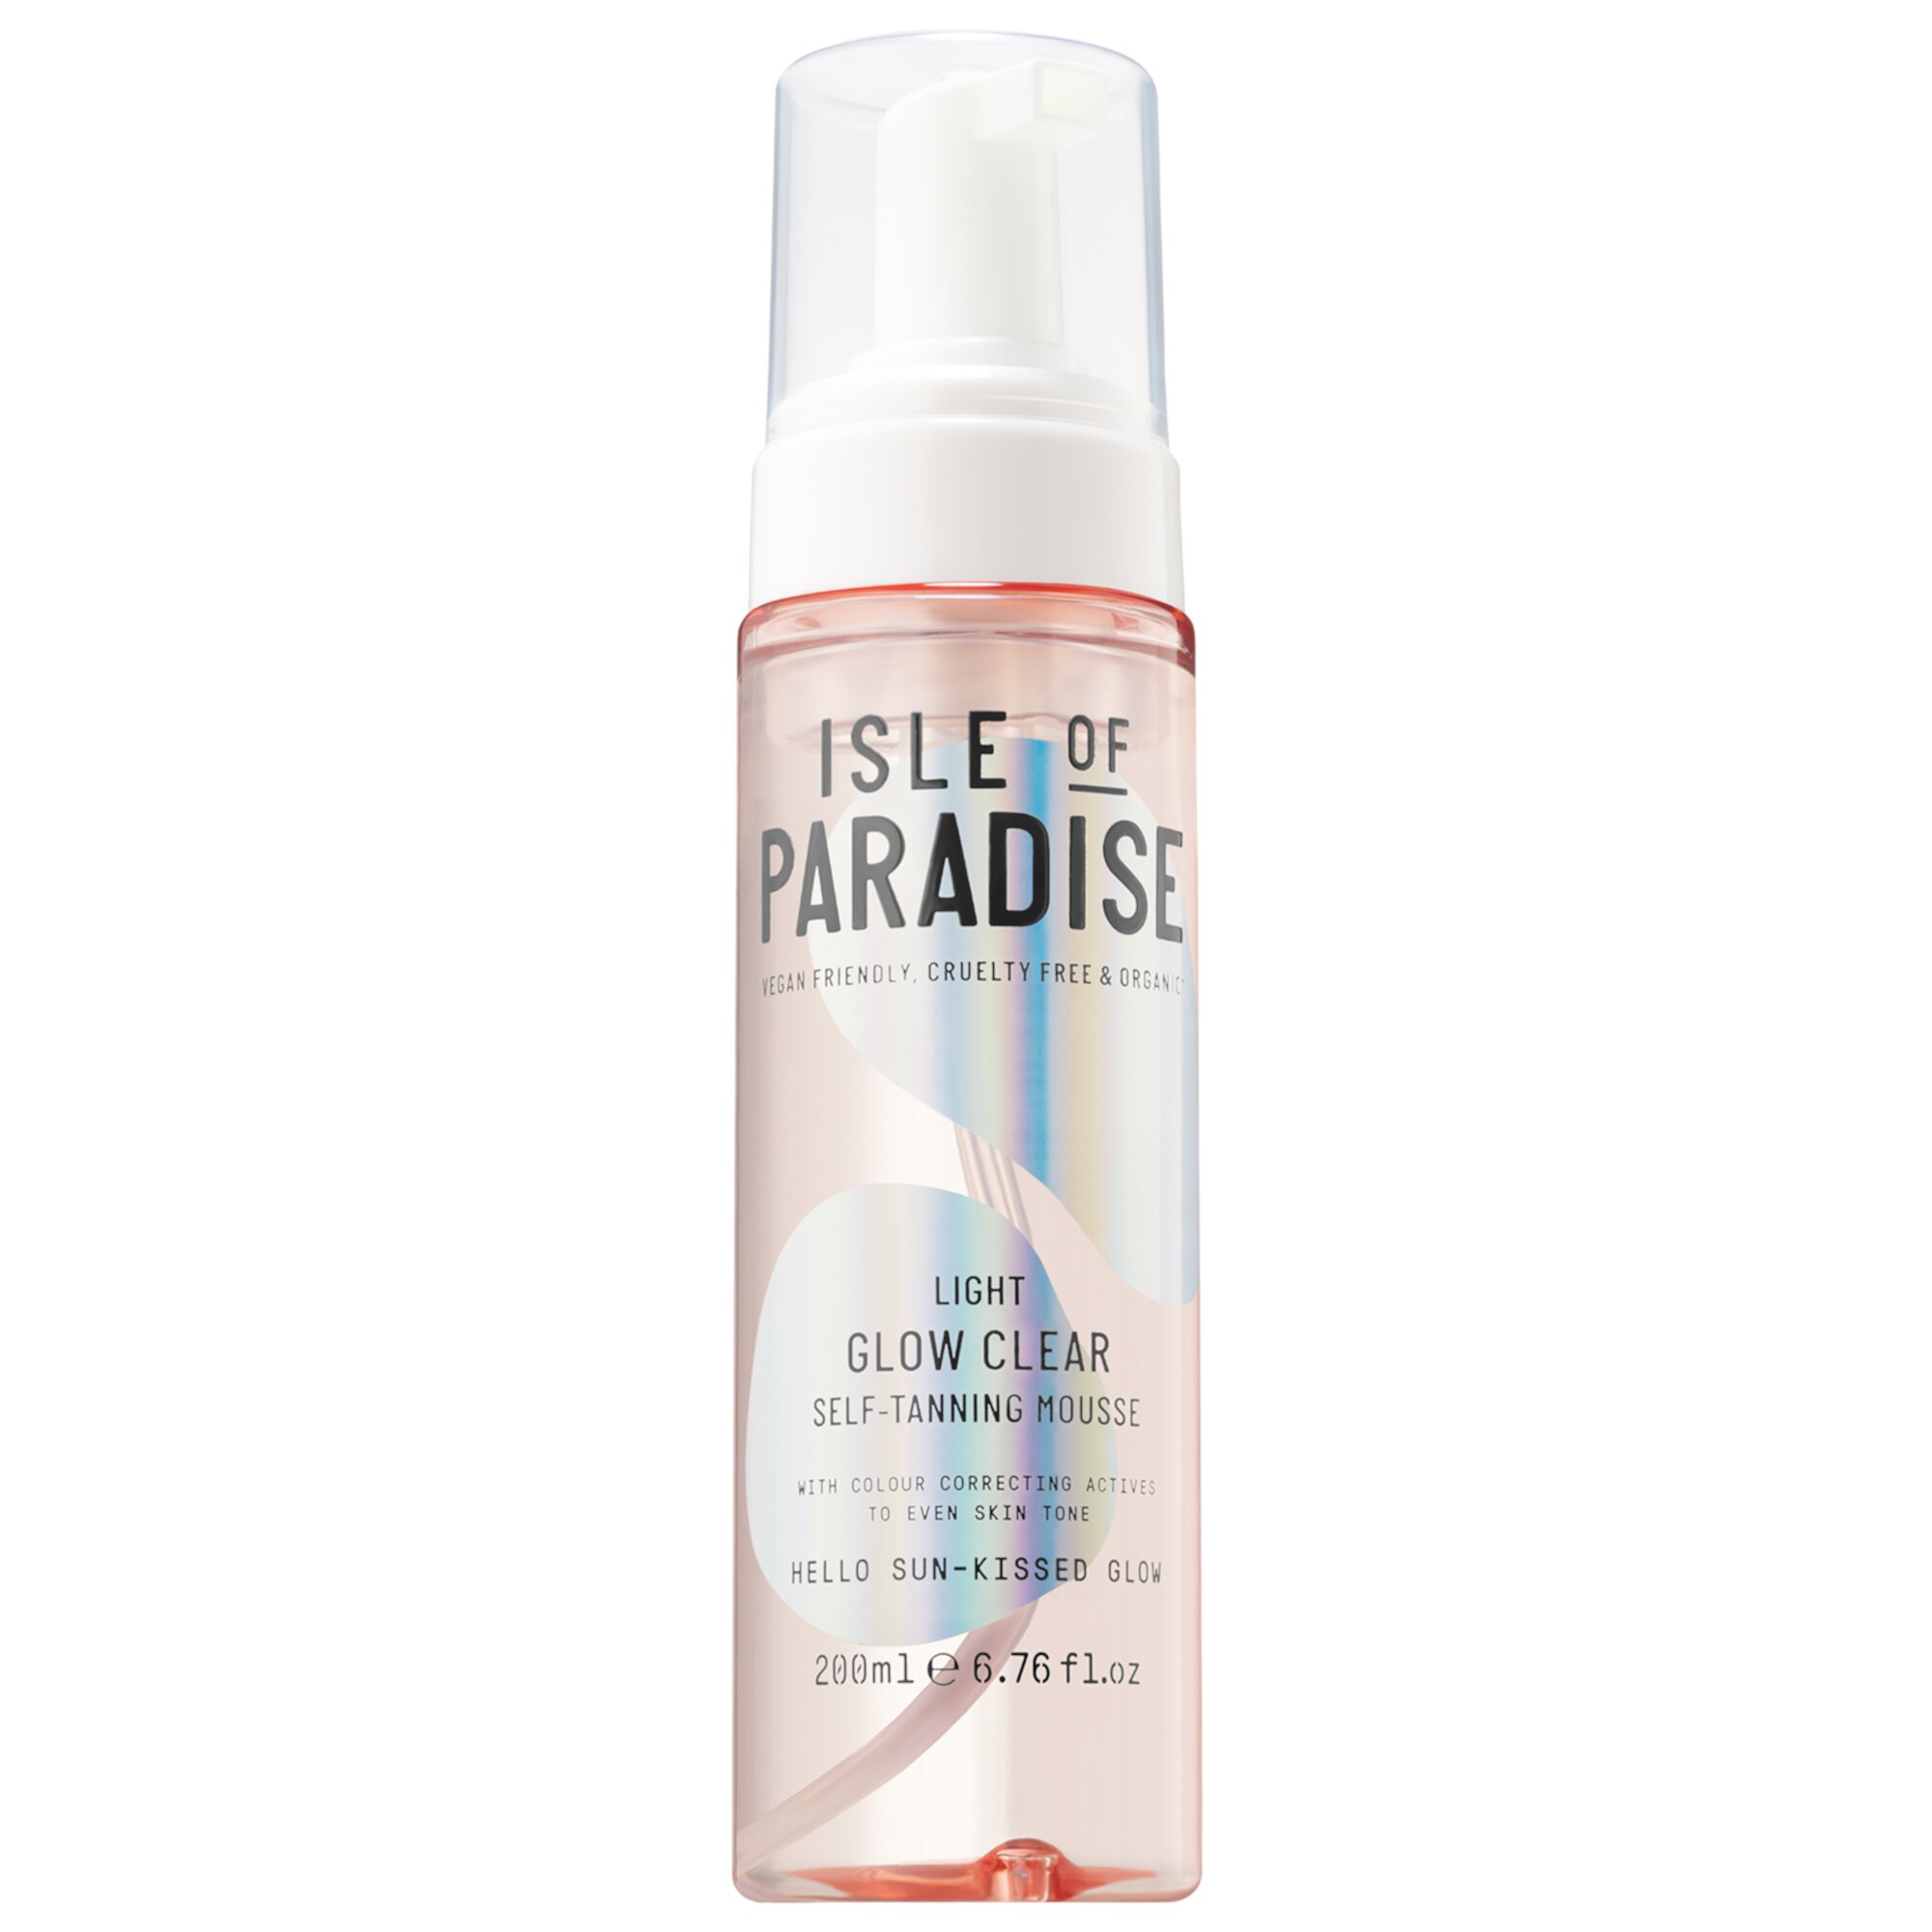 Glow Clear, Color Correcting Self-Tanning Mousse Isle of Paradise